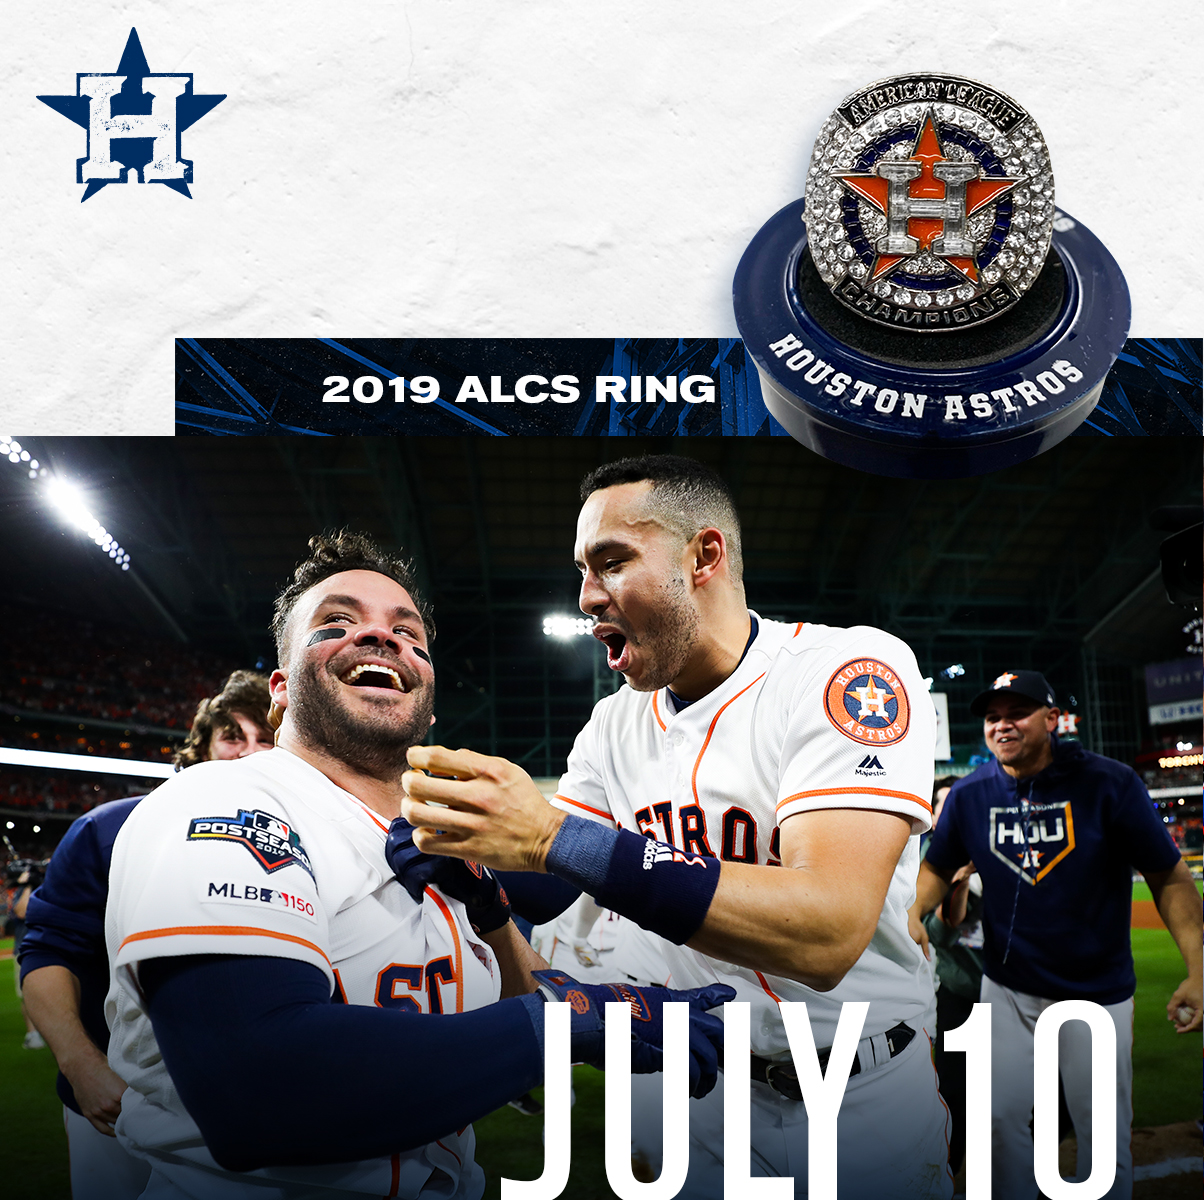 With Yankees in town, Astros plan conveniently-timed giveaways for the fans